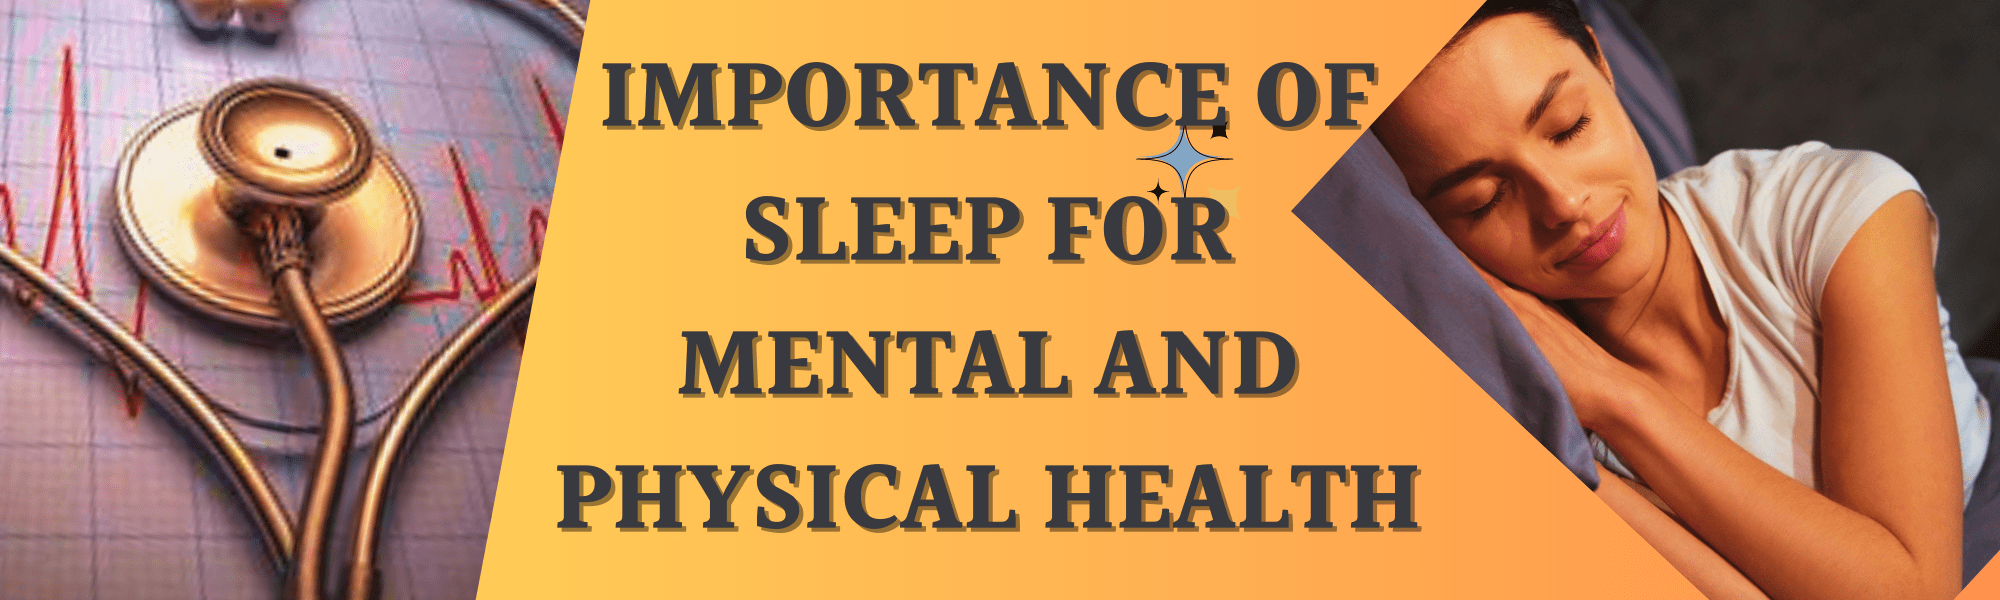 Importance of Sleep for Mental and Physical Health